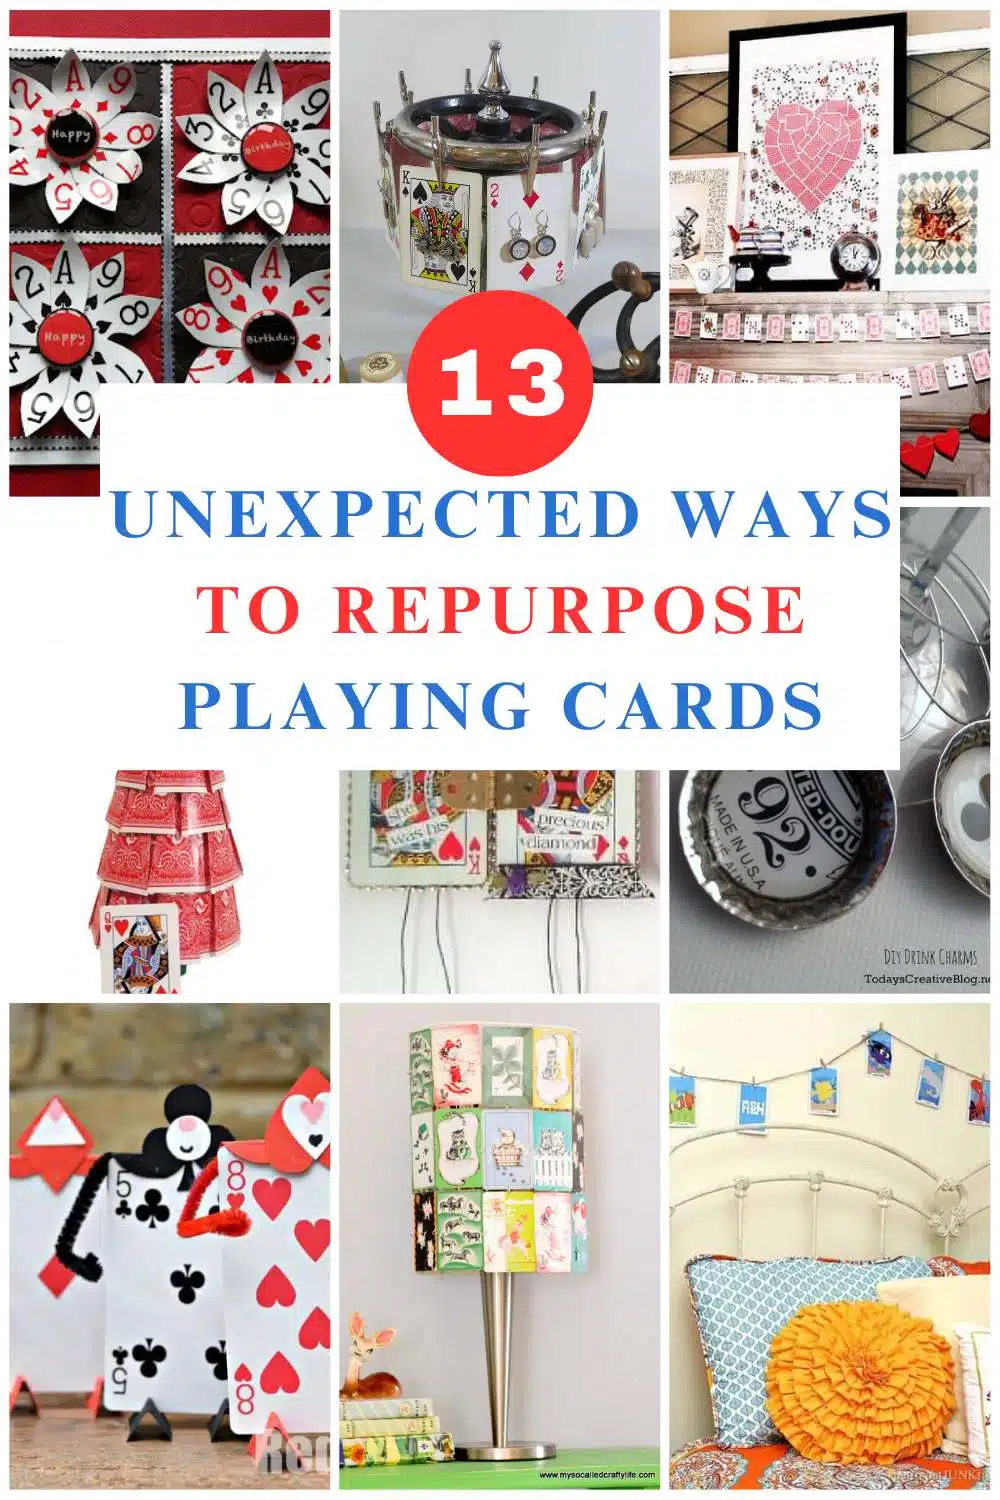 13 Unexpected Ways to Repurpose Playing Cards